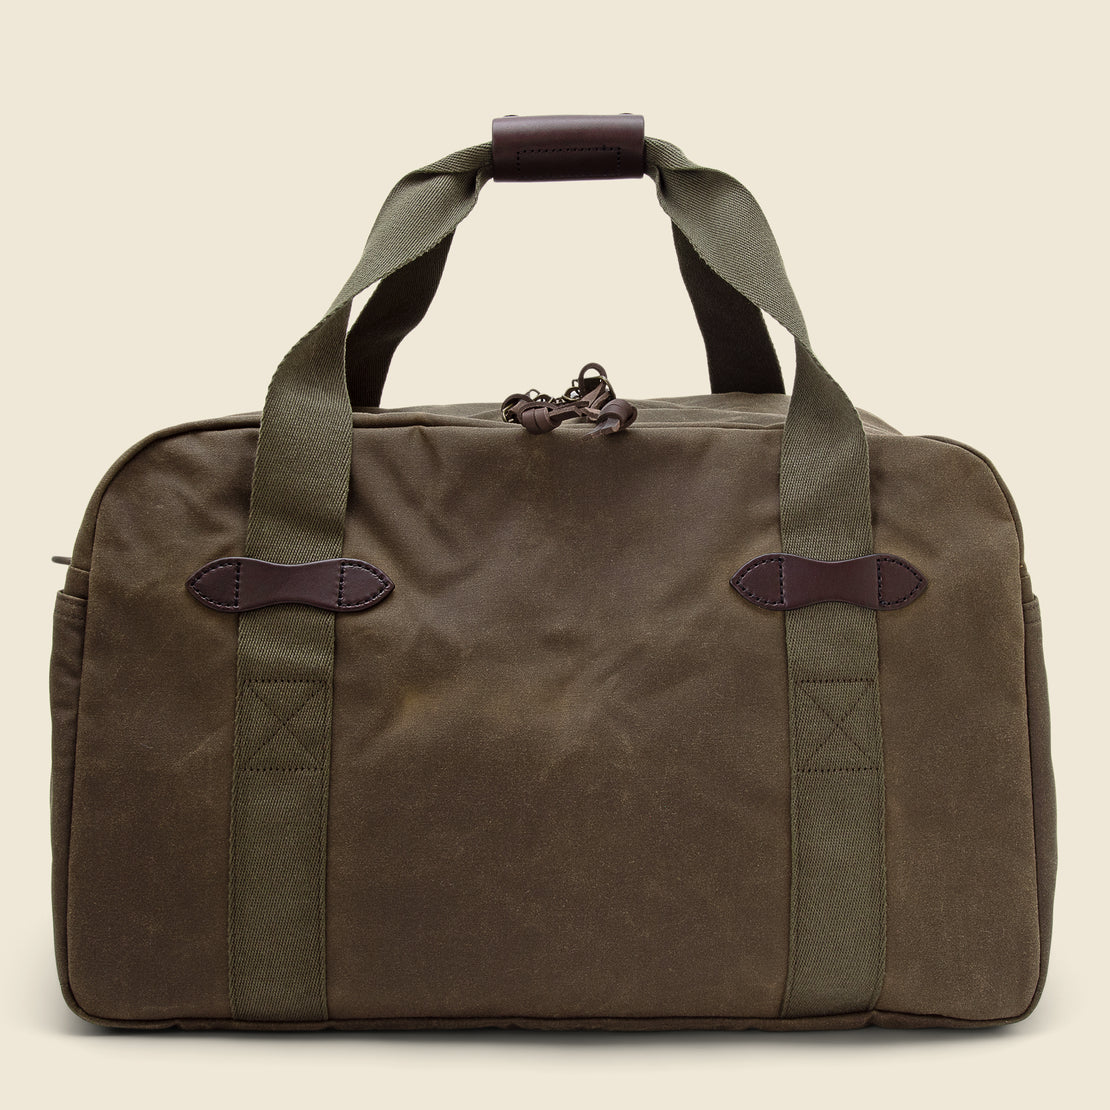 Tin Cloth Medium Duffle Bag - Otter Green - Filson - STAG Provisions - Accessories - Bags / Luggage